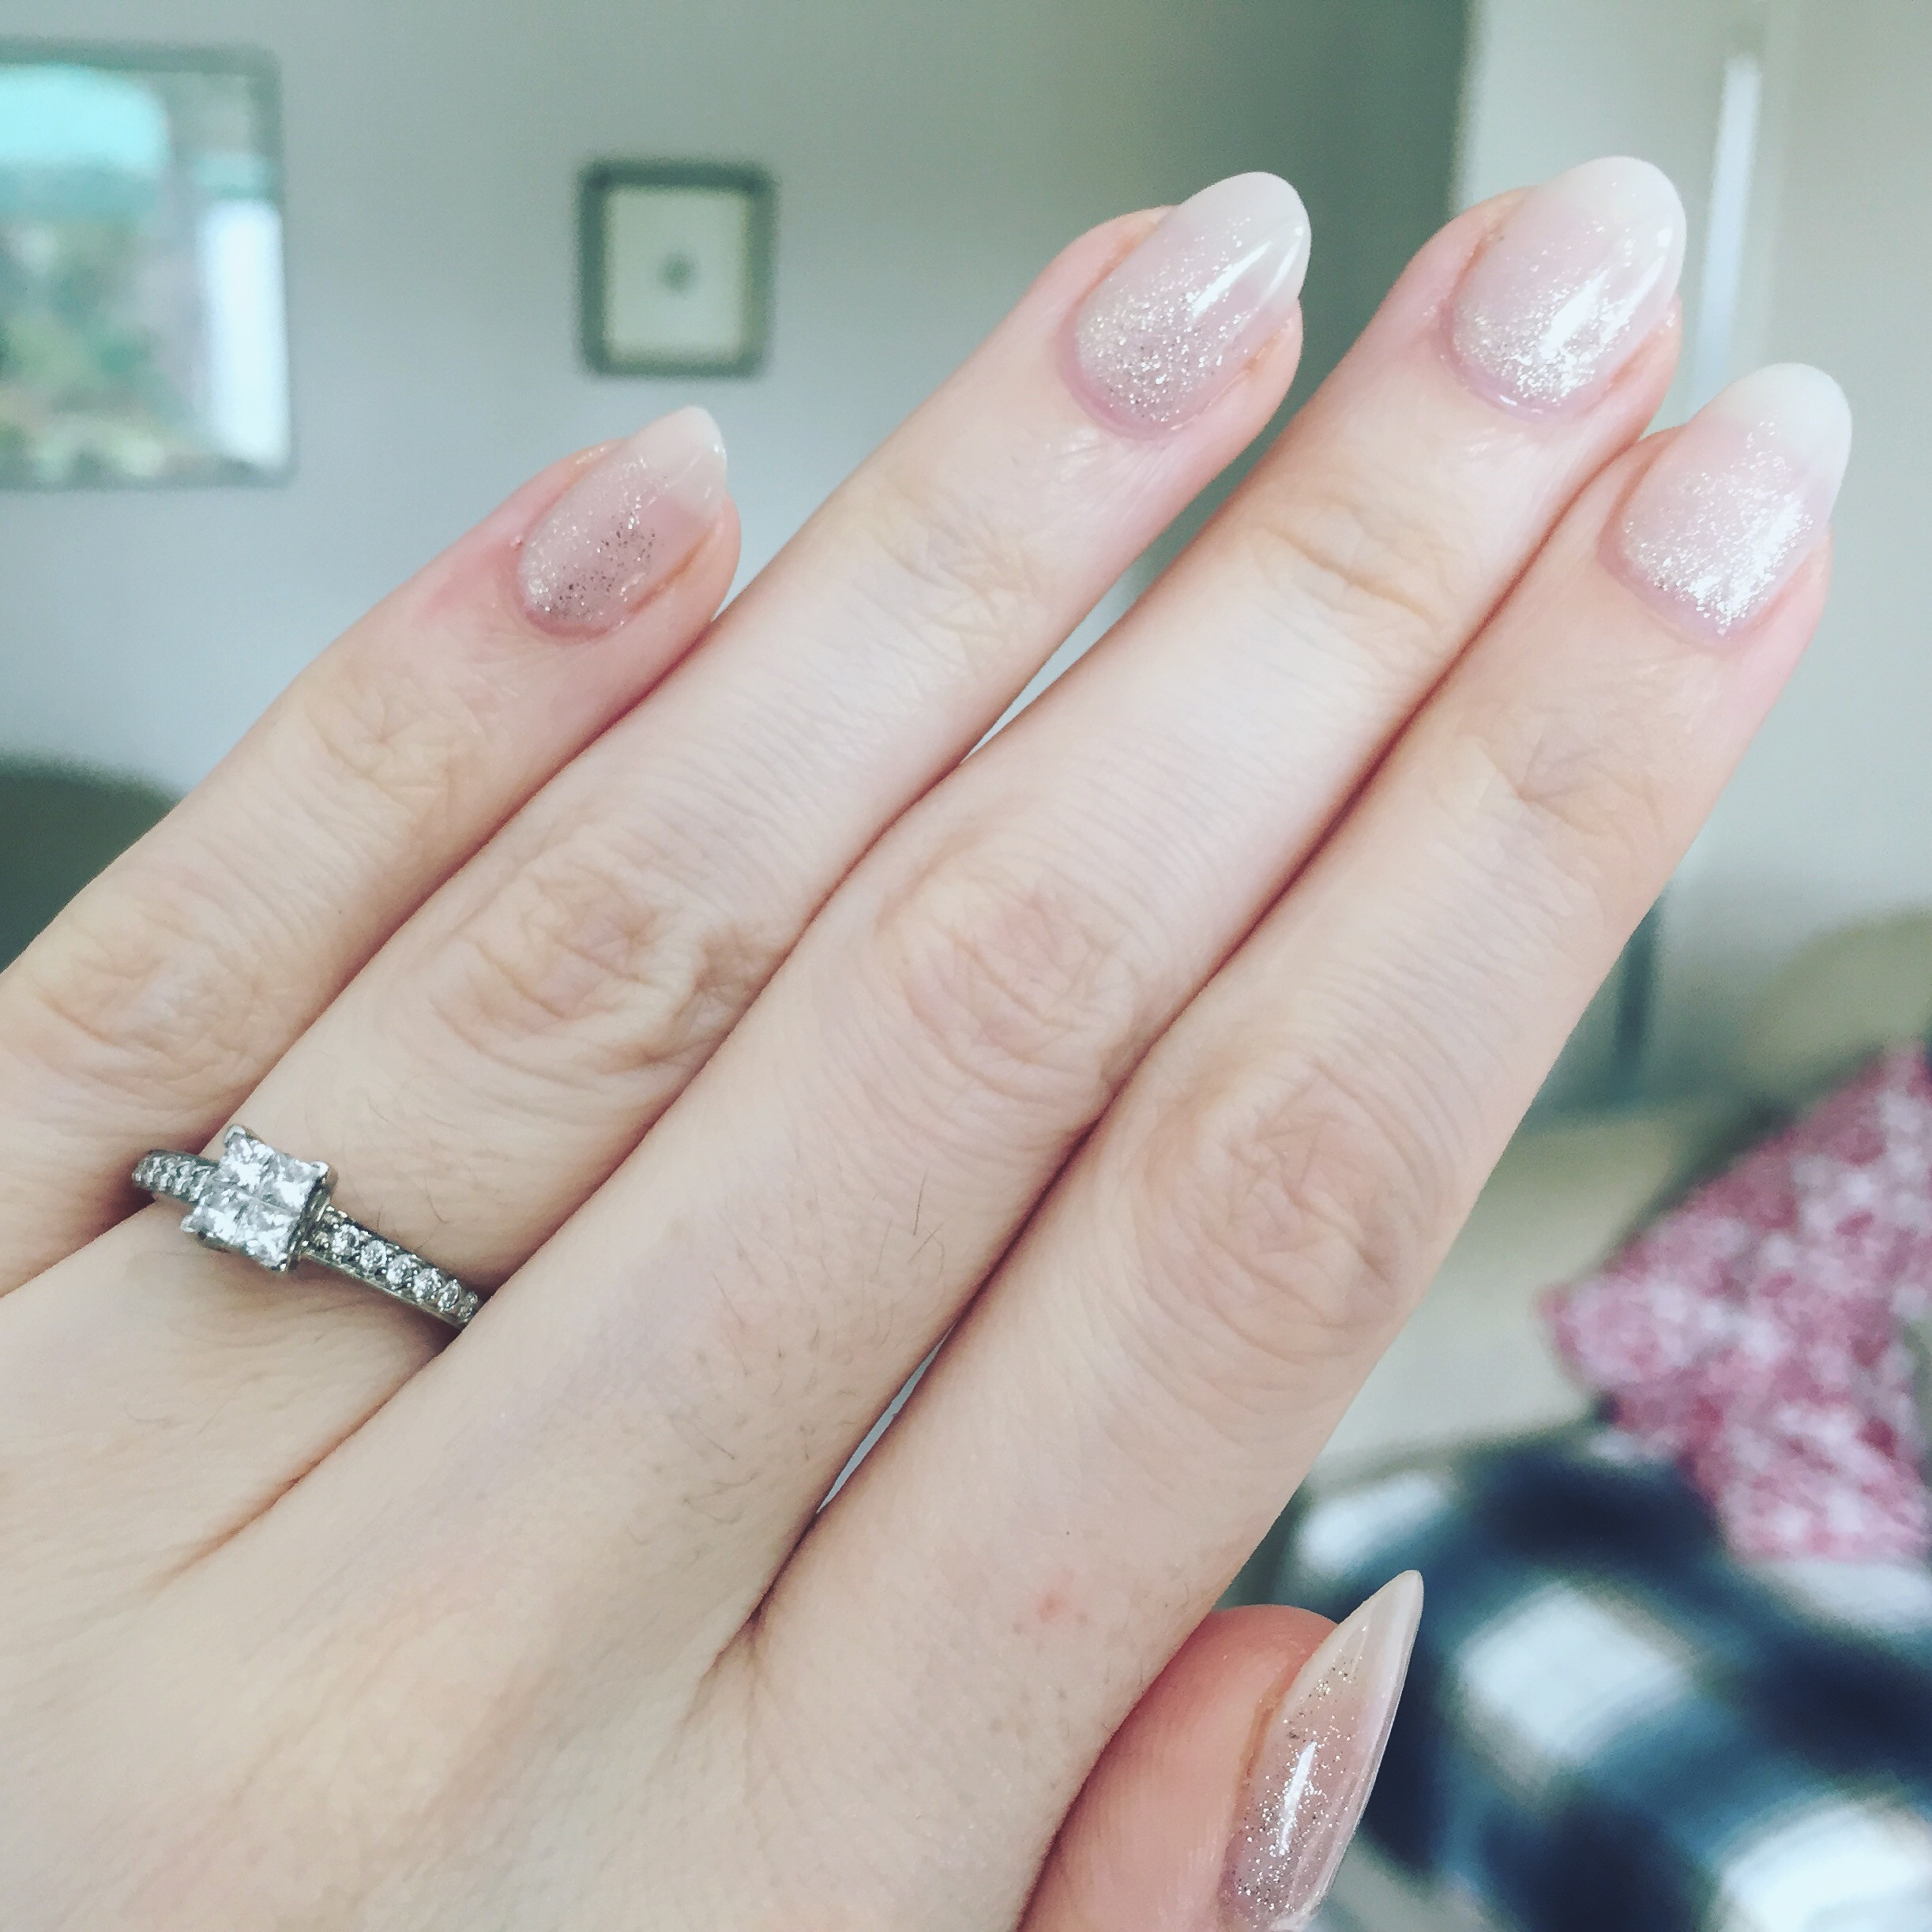 Nails For Wedding Day
 Show me your wedding day nails